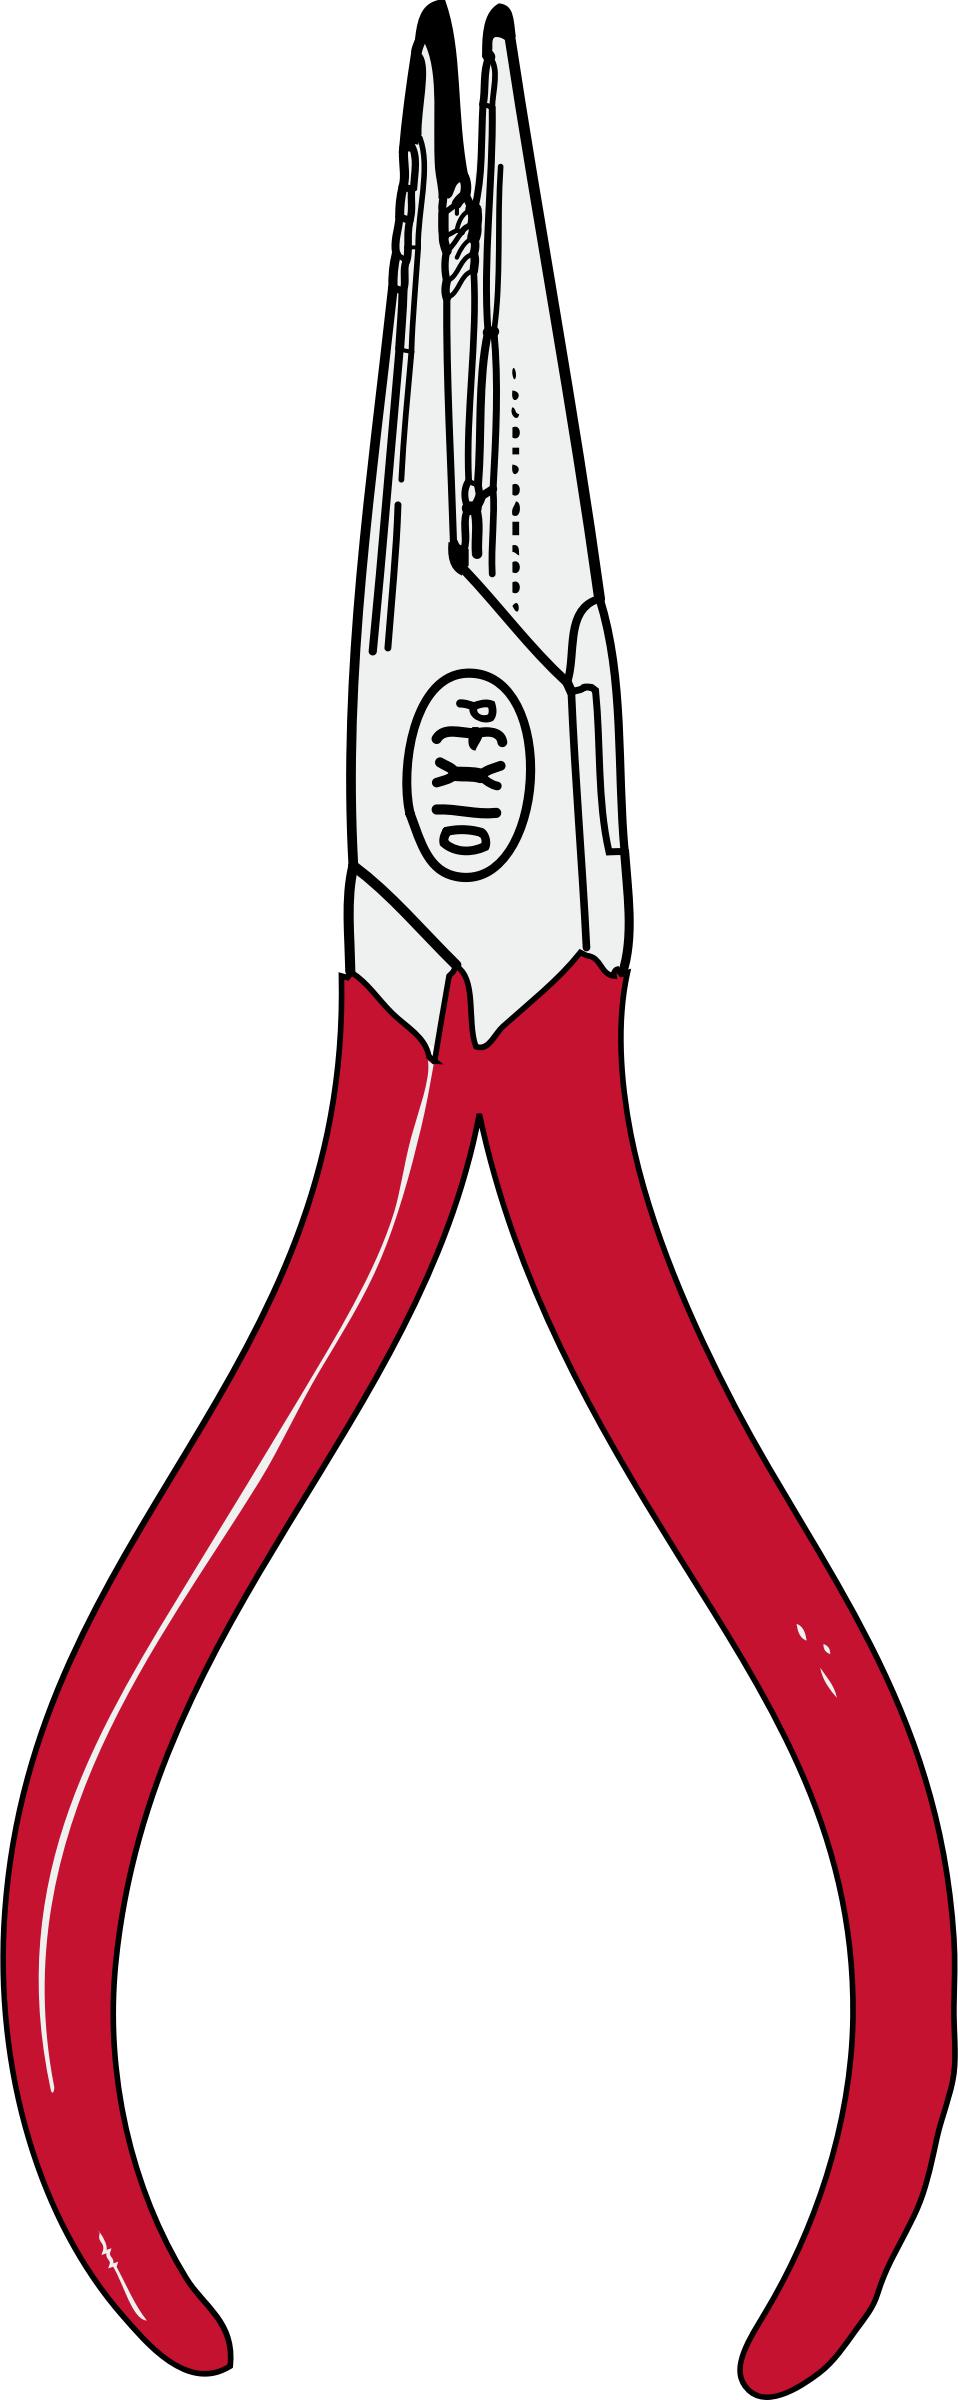 needlenose pliers png